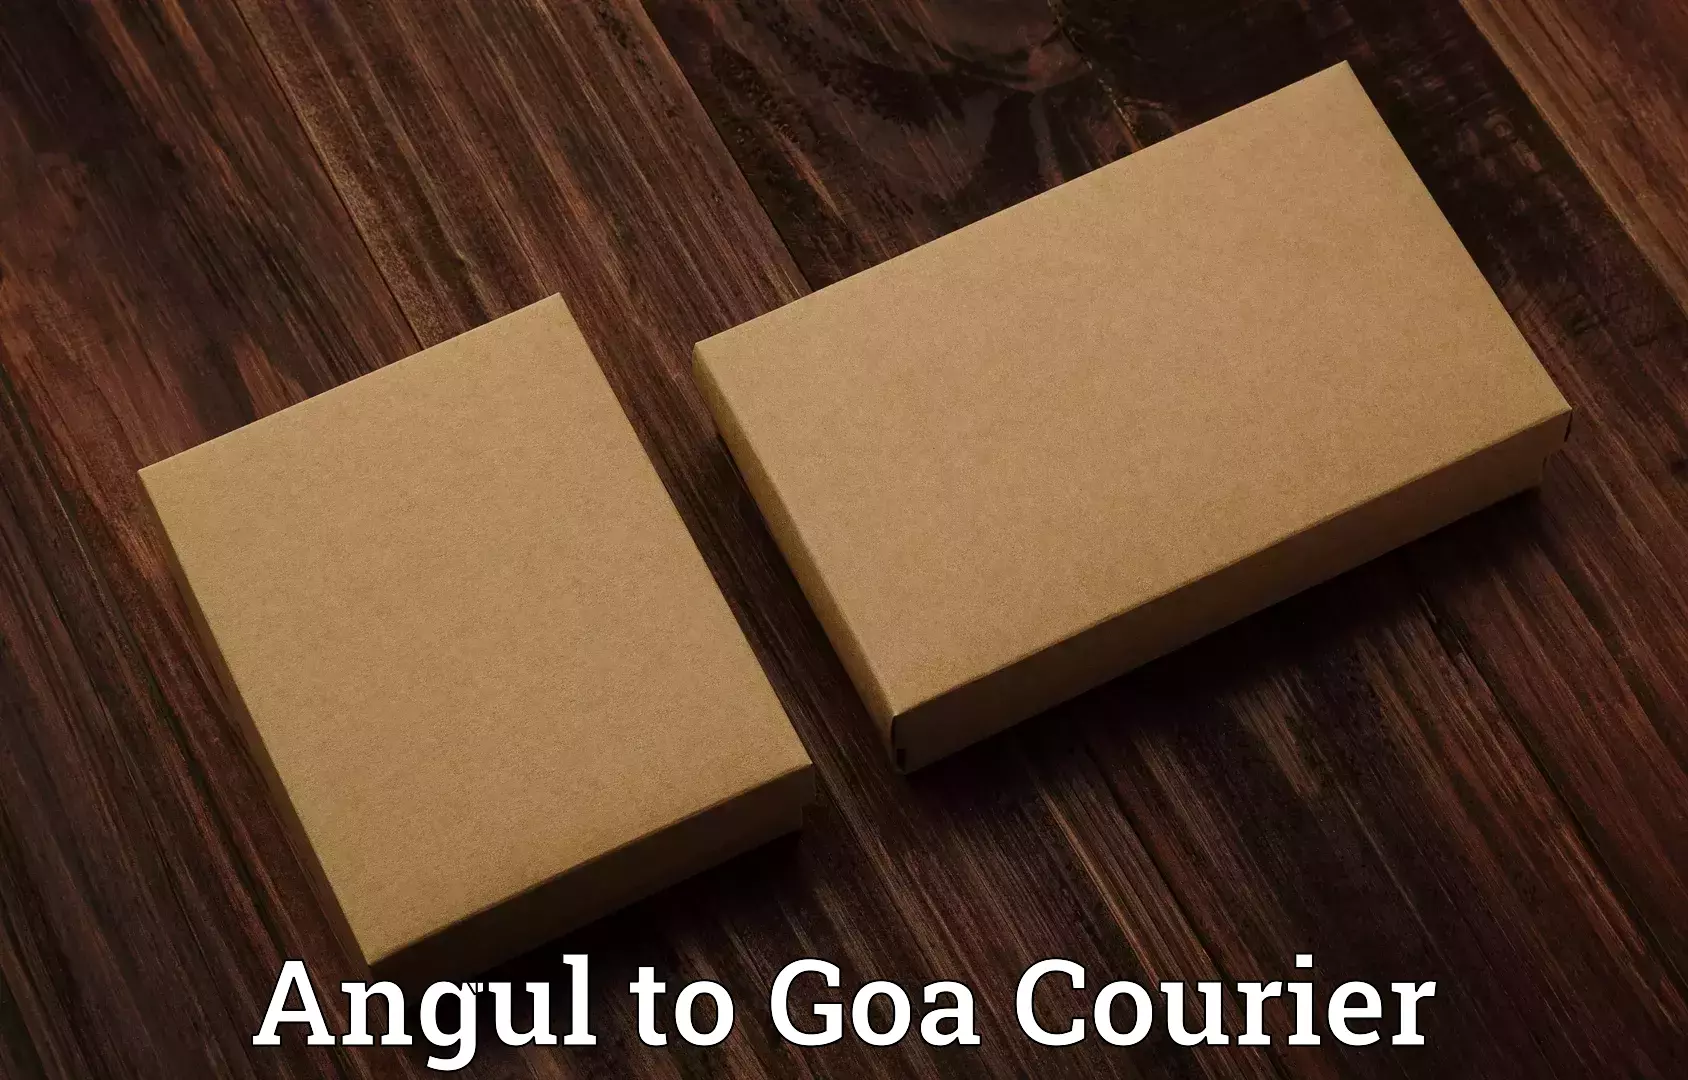 Luggage transport consultancy Angul to Goa